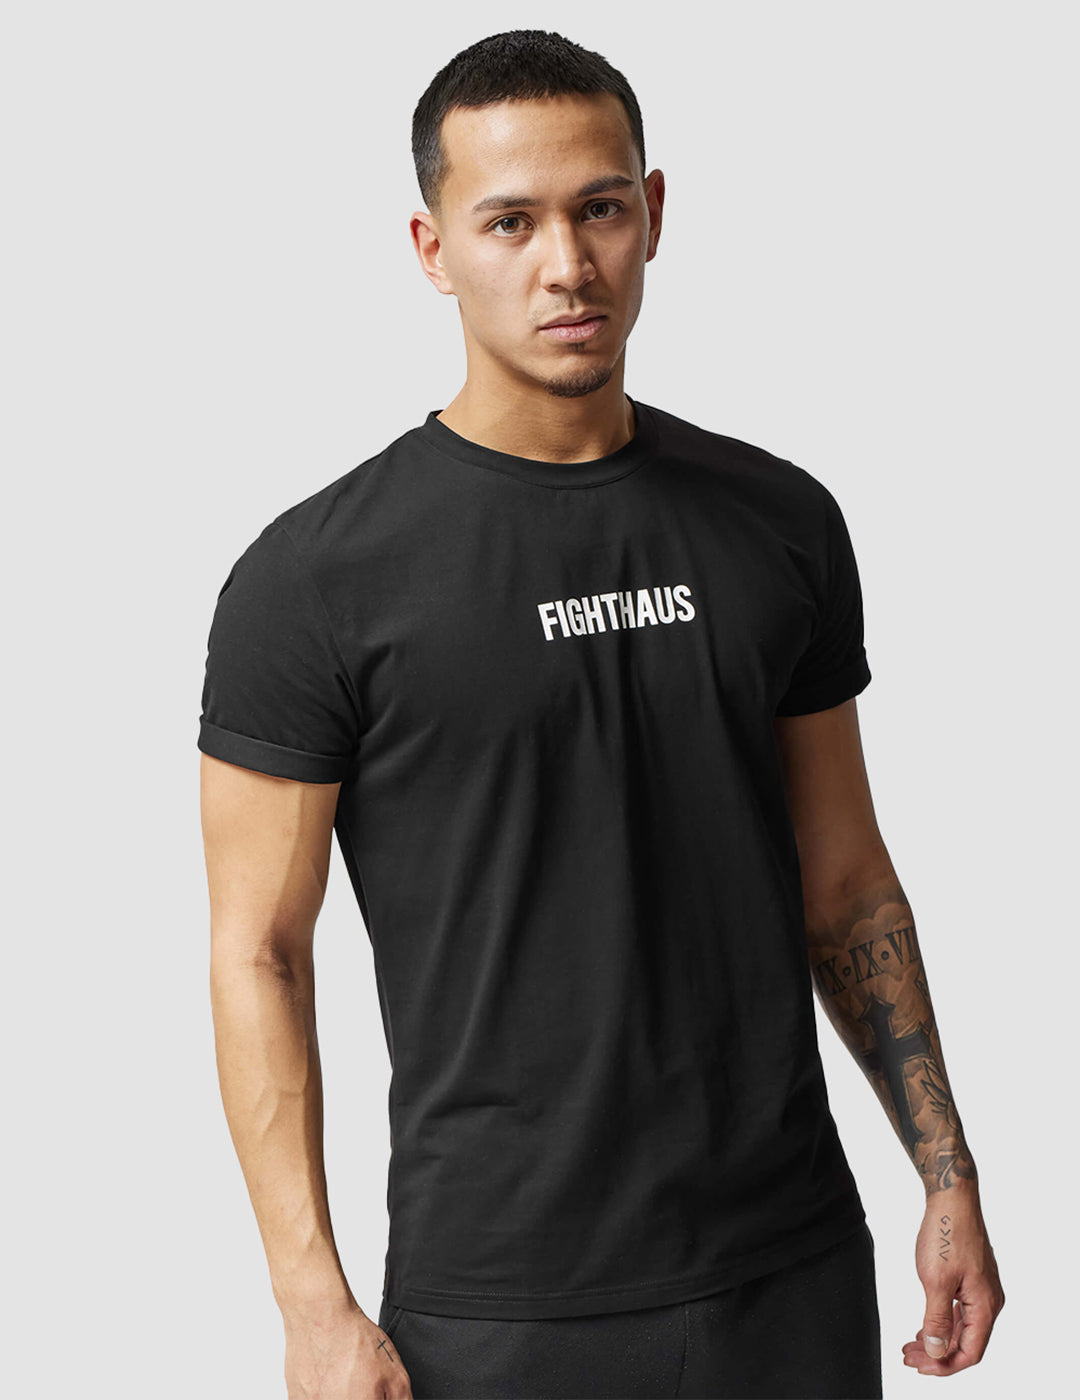 Premium Logo and | FIGHTHAUS T-Shirt - – Fighthaus Black Tops Fighter Core MMA